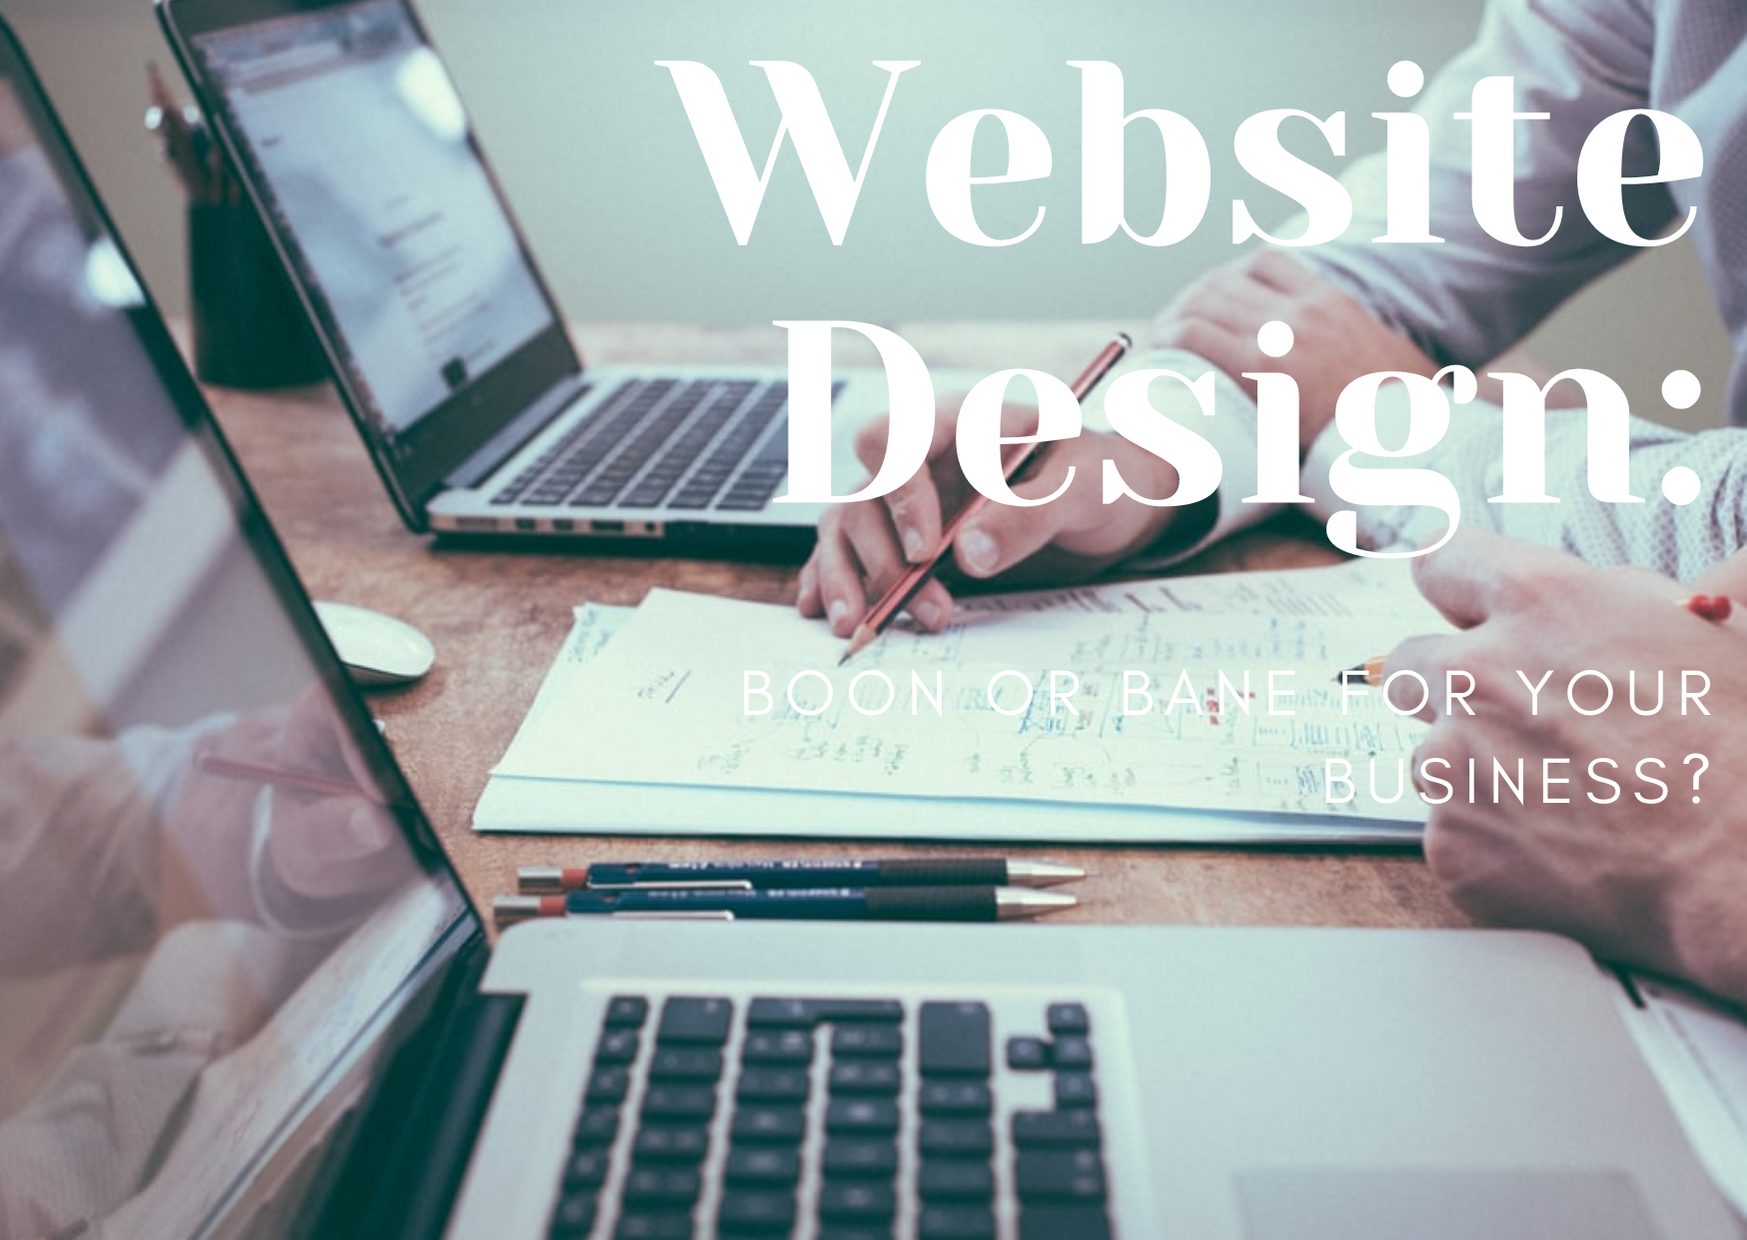 Websites: Is your website good for your business?